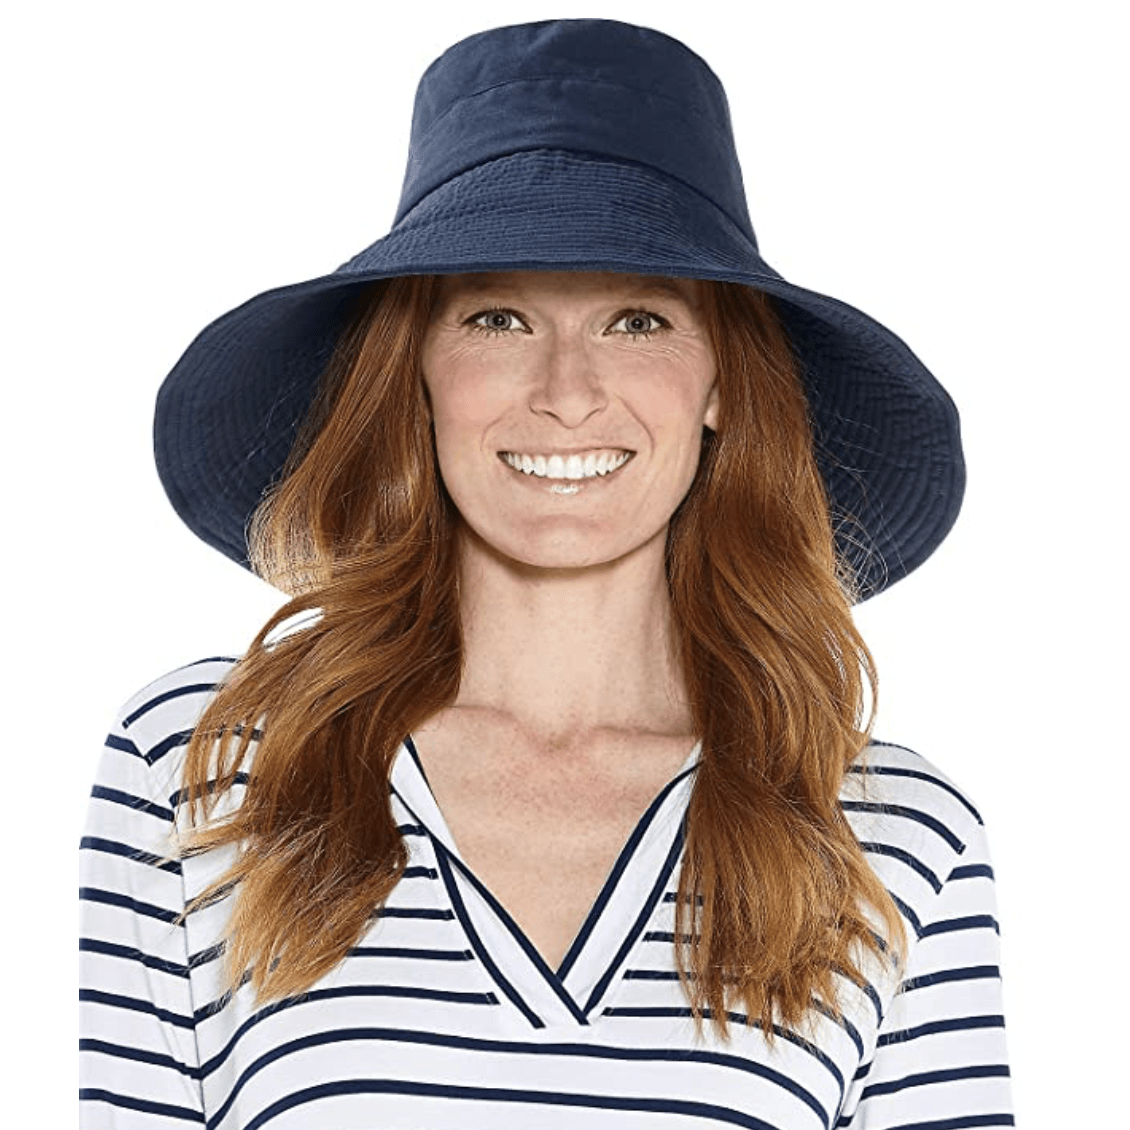 Weshiny Summer Wide Brim Sun Hat for Women Adjustable Hat with Chin Strap UPF 50 Sun Protection Hat Foldable Visor Hats